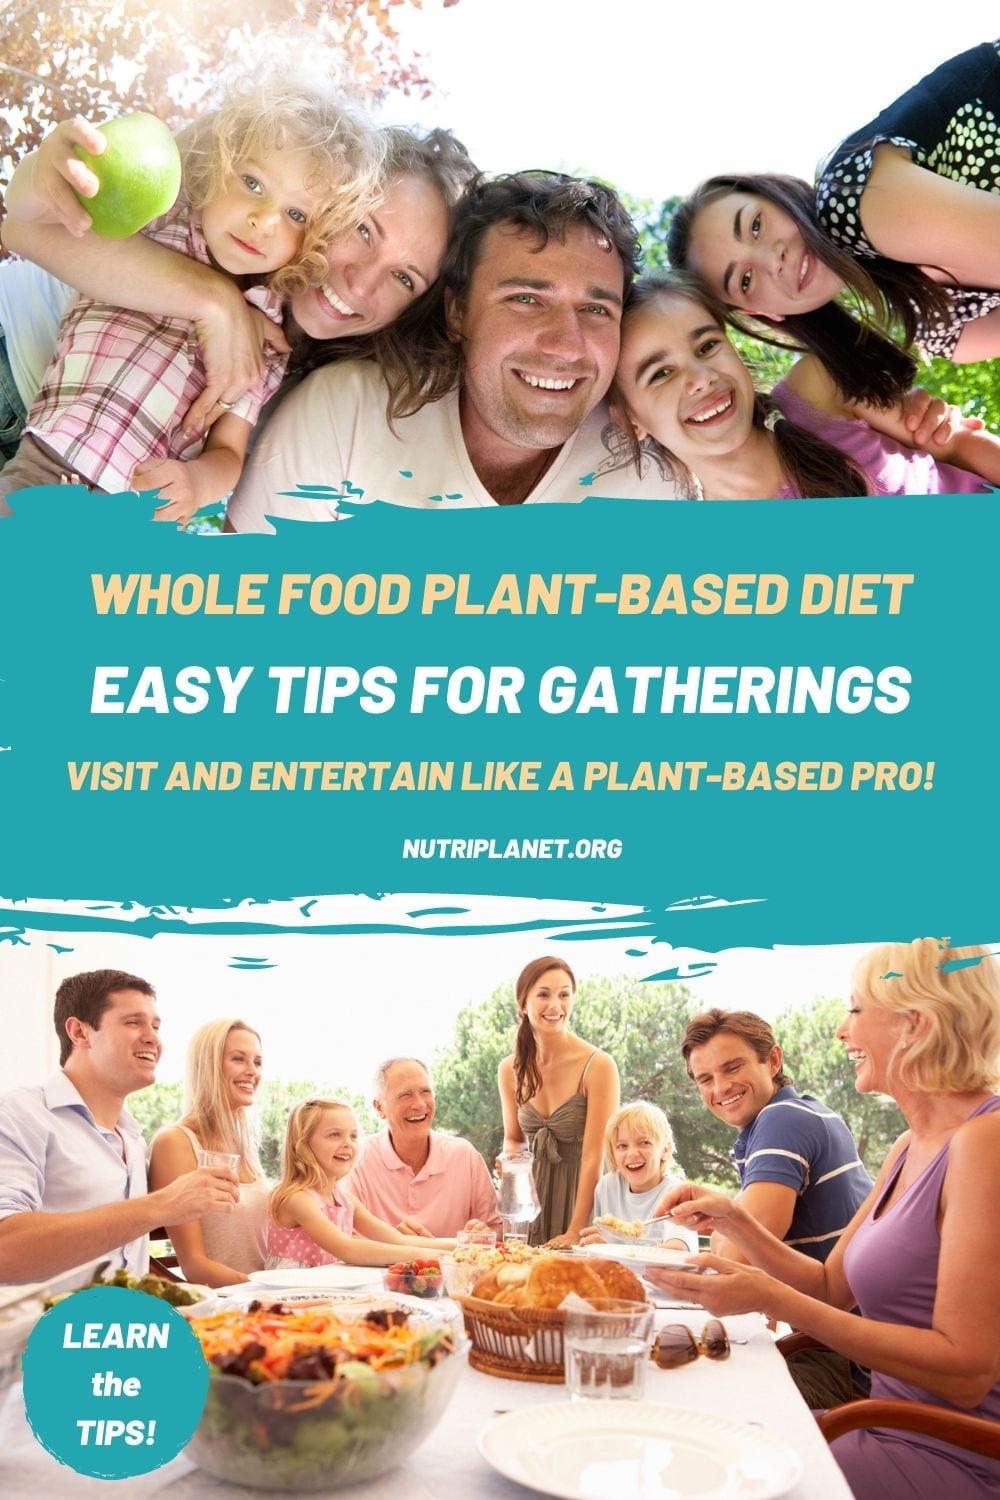 Learn a few easy tips on gatherings while eating a whole food plant-based diet